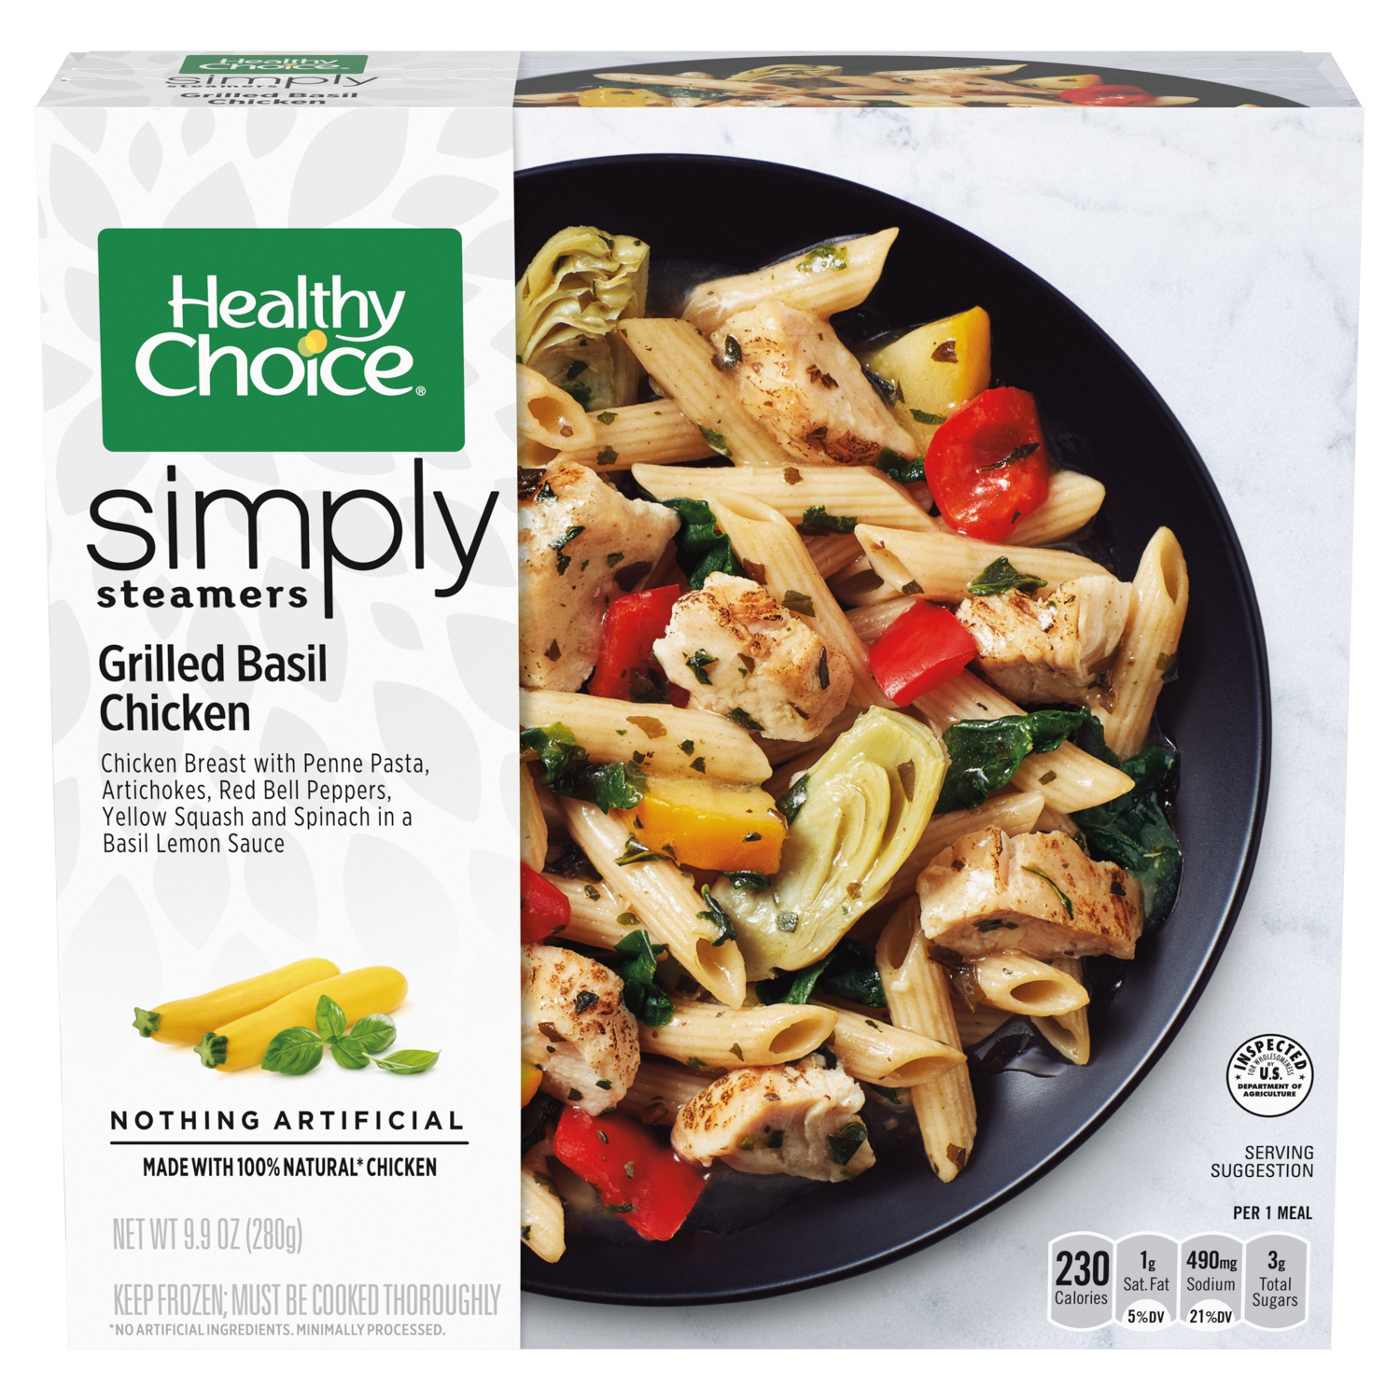 Healthy Choice Simply Steamers Grilled Basil Chicken Frozen Meal; image 1 of 2